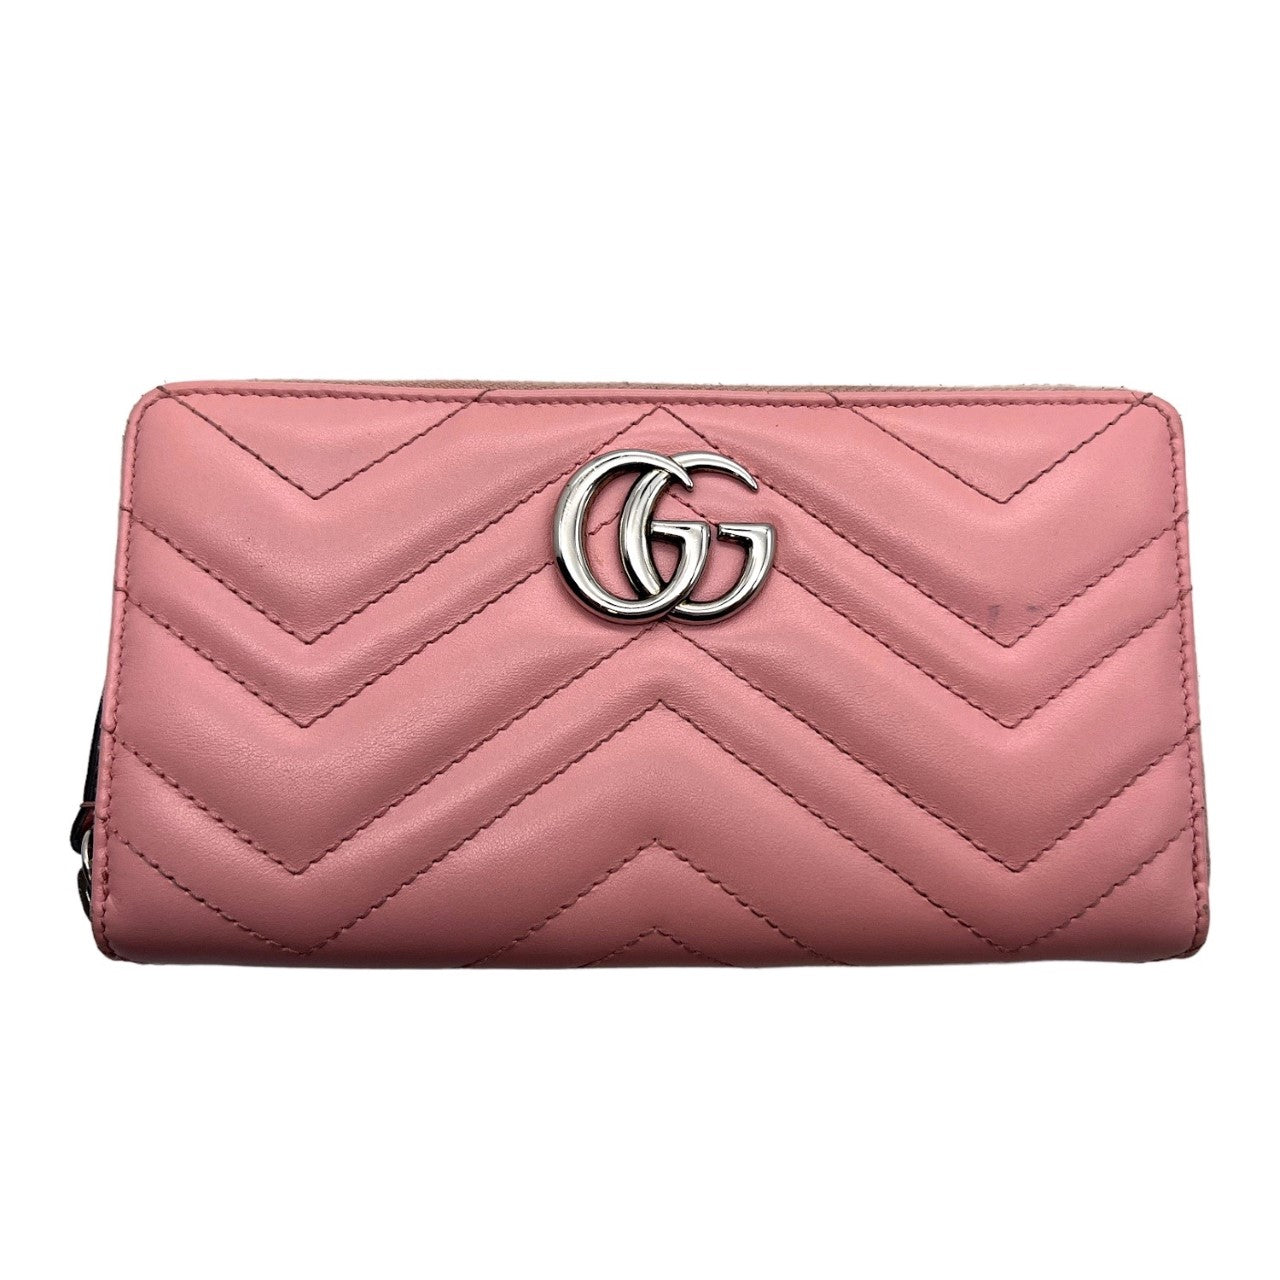 CHANEL Leather Zip-Around Folding Wallets for Women for sale